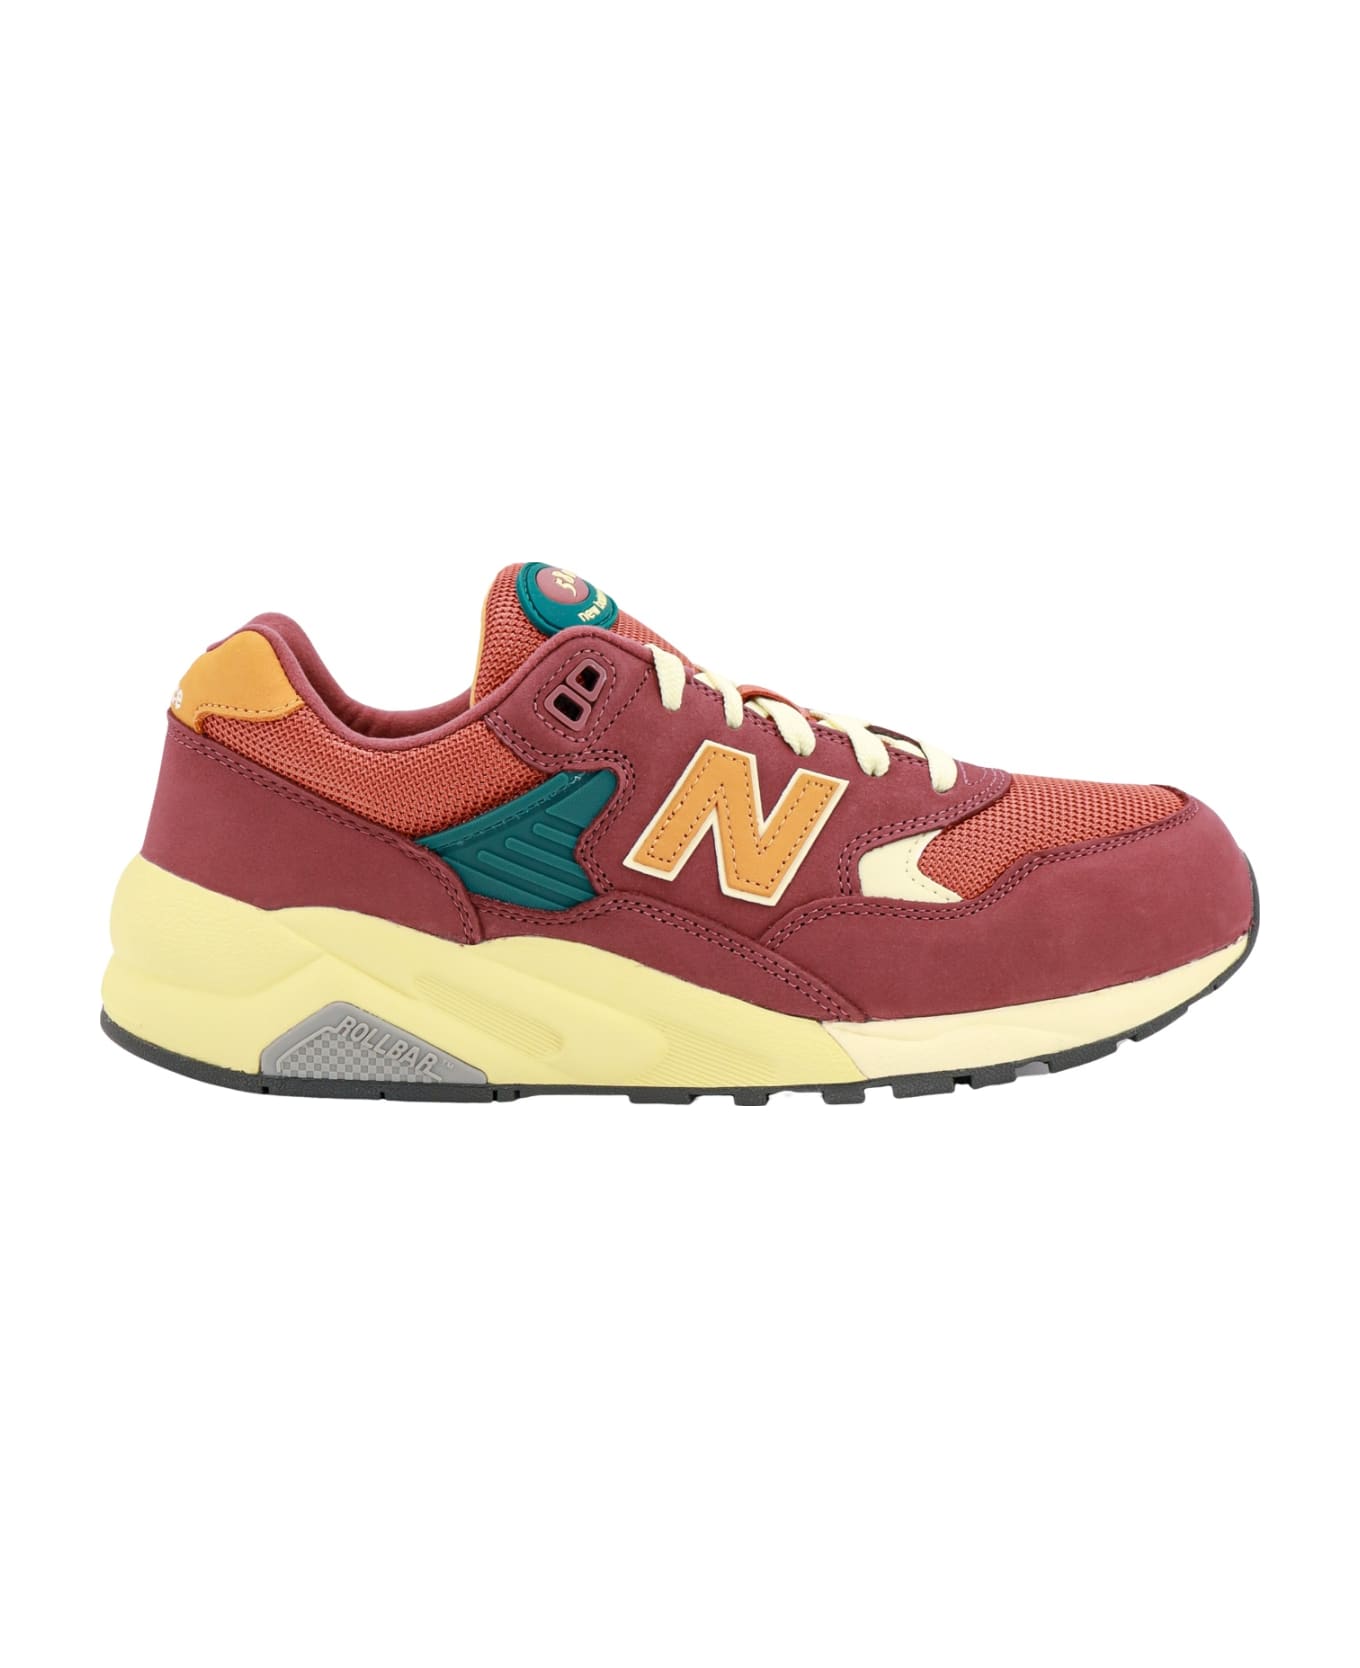 New Balance 580 Sneakers - Multicolor